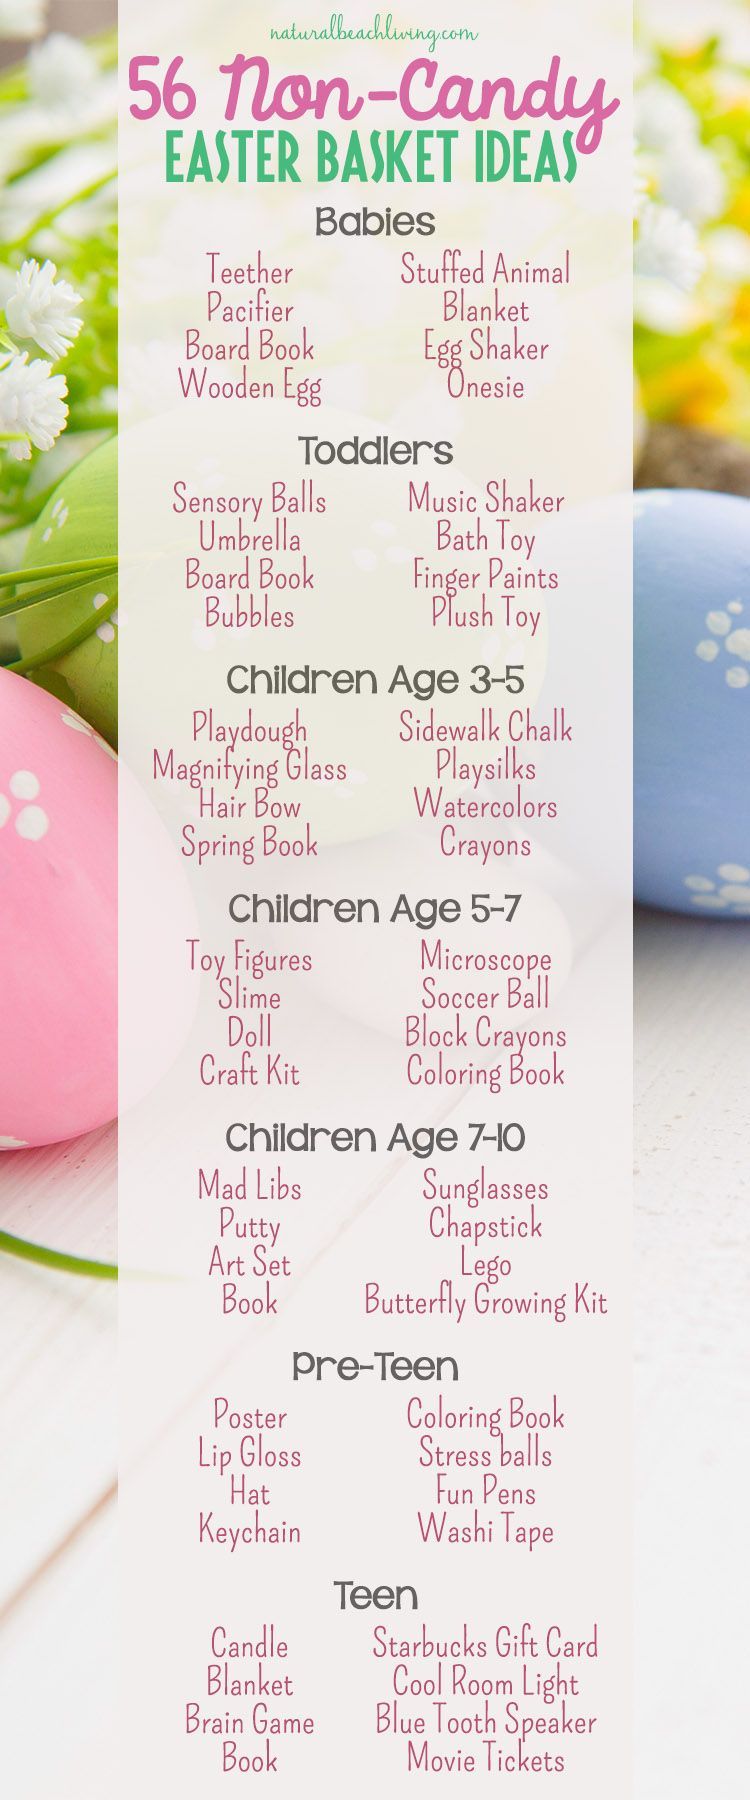 56 Non-Candy Easter Basket Ideas for kids, Budget friendly Easter Baskets, Easter for toddlers, Easter basket ideas for babies,